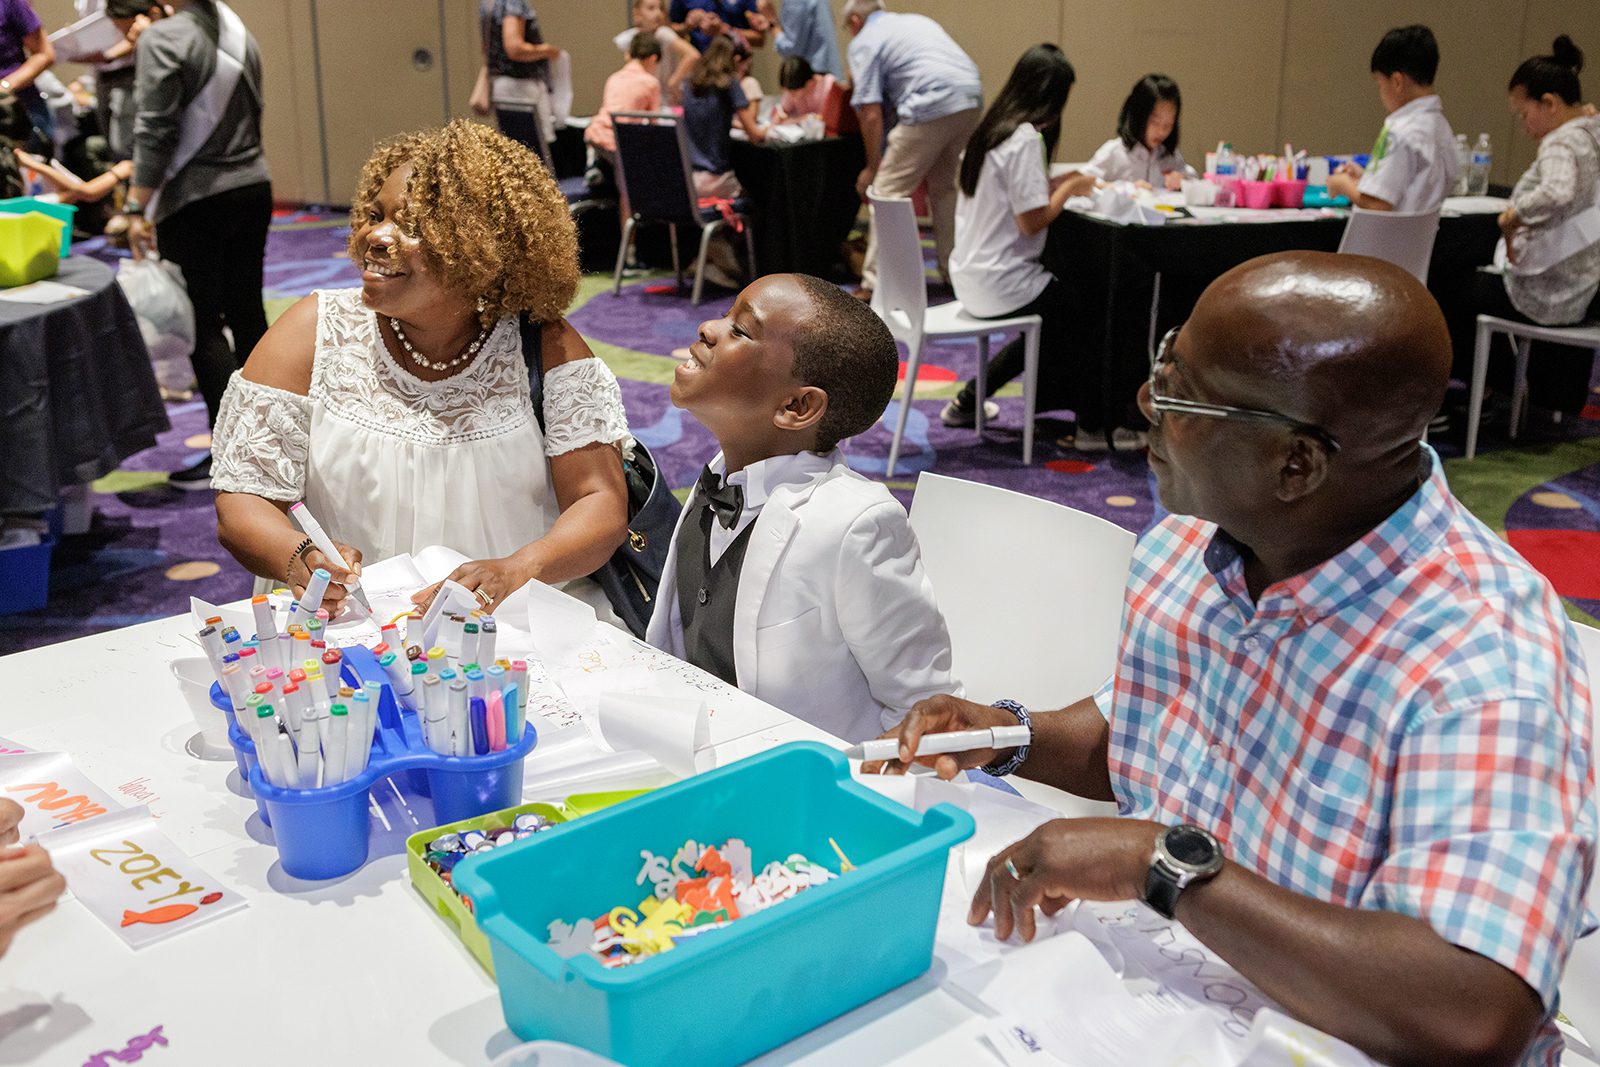 Families participate in activities during the CatholicHOM session of the Eucharistic Congress, June 18, 2022, at the Georgia International Convention Center near Atlanta. Photo by Carlisle Kellam